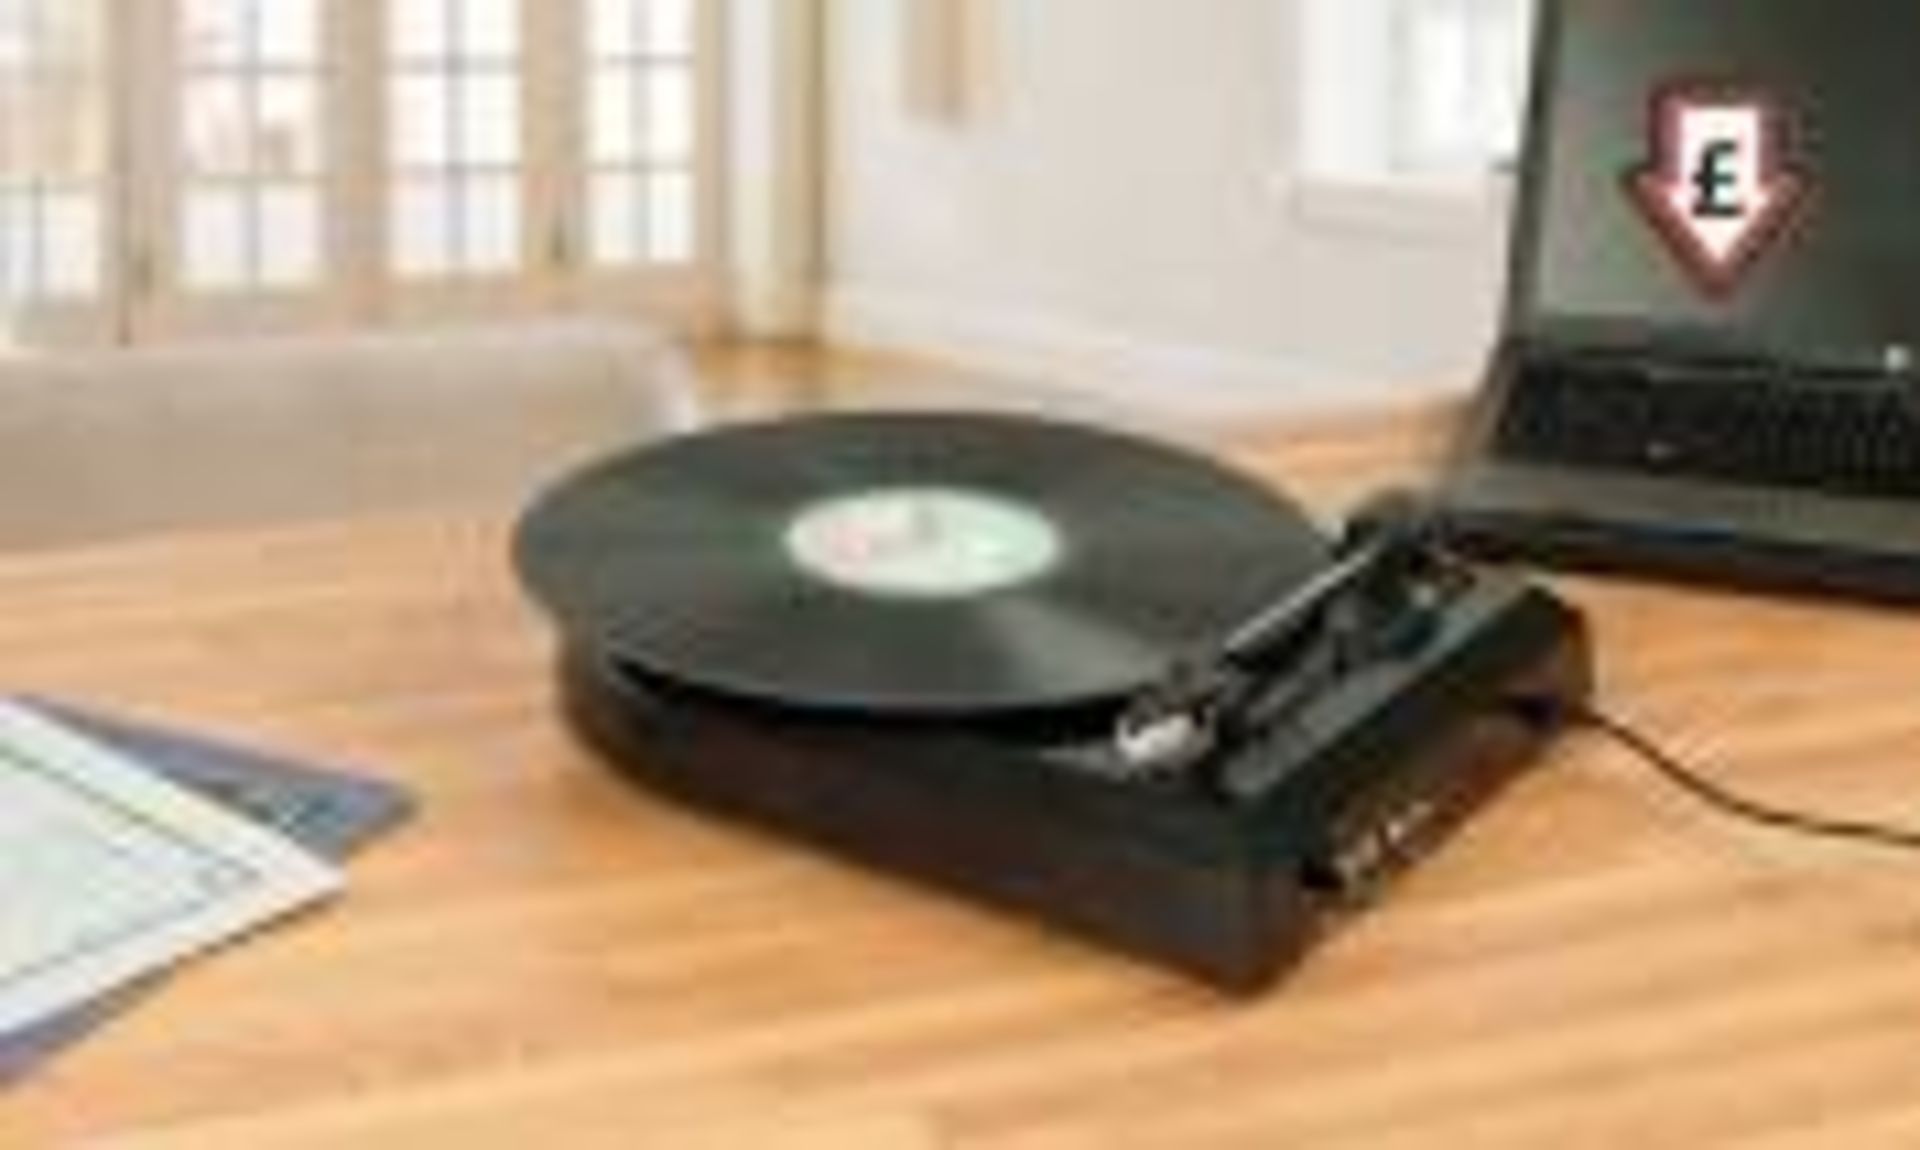 V Brand New Zennox USB Turntable With Built In Speaker With Volume Control Convert LP Records To